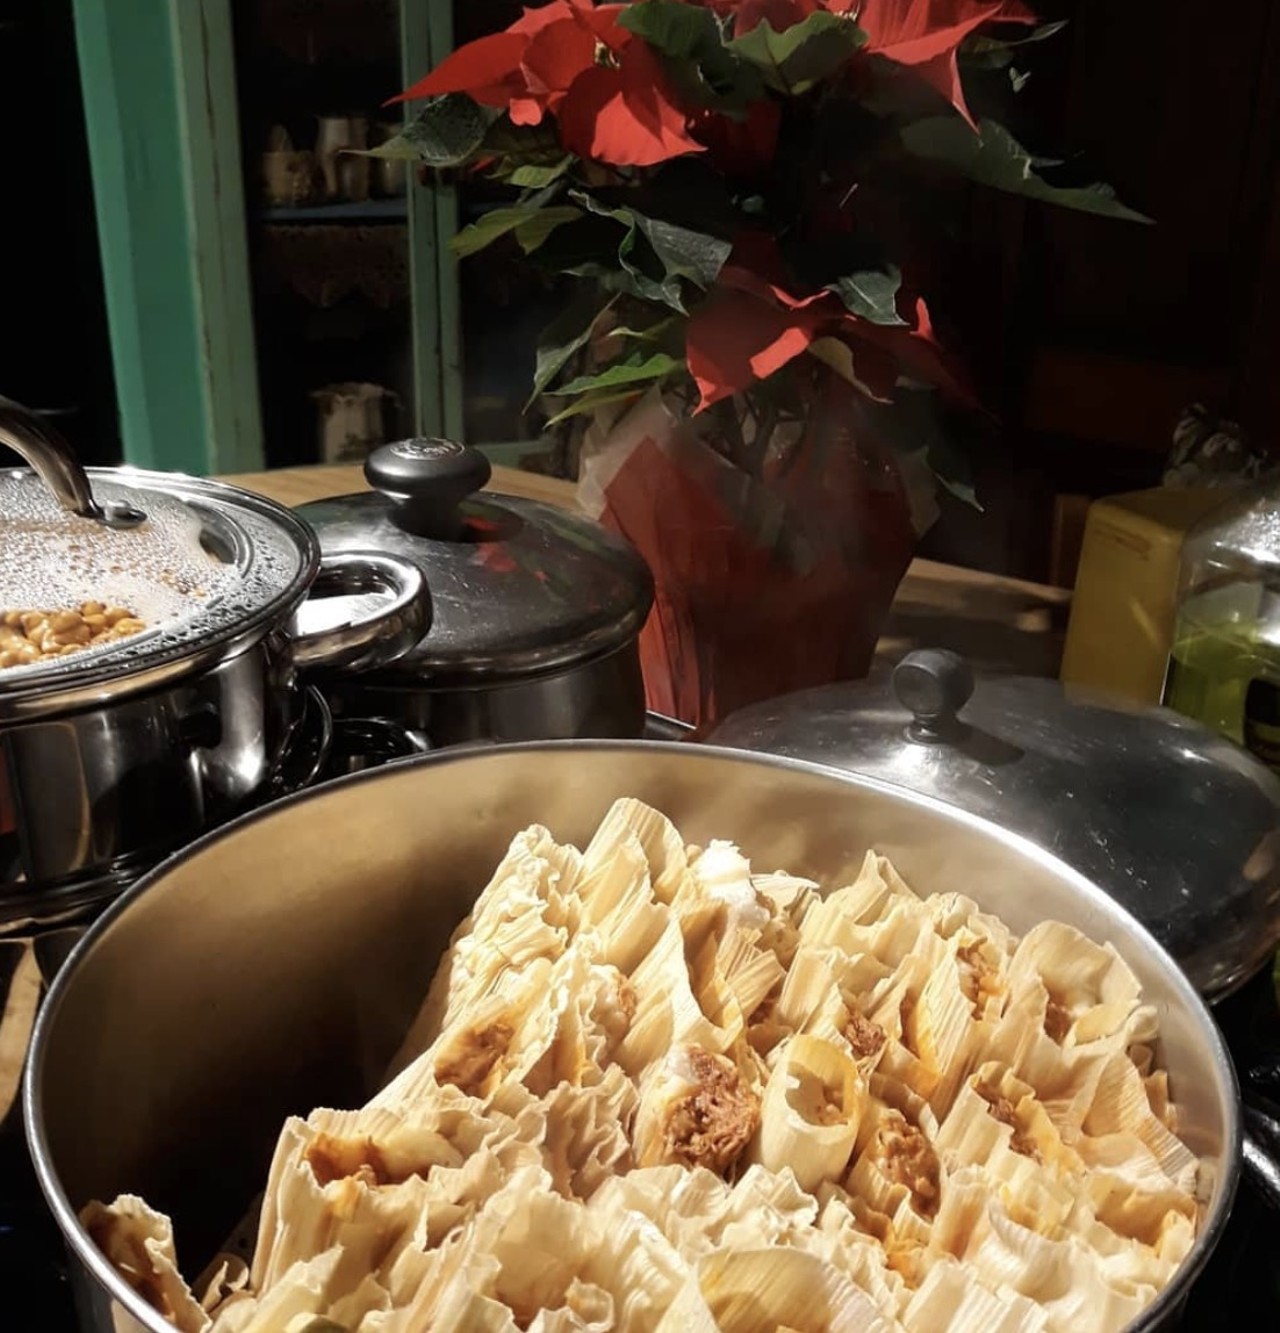 Throw a tamalada 
No, this isn't one for beginners, but if you're serious about having a Puro San Anto Christmas, invite the relatives over to make your own tamales. Just be ready to have your Tia telling you exactly how should be done. 
Photo via Instagram / jmichaelwalker1